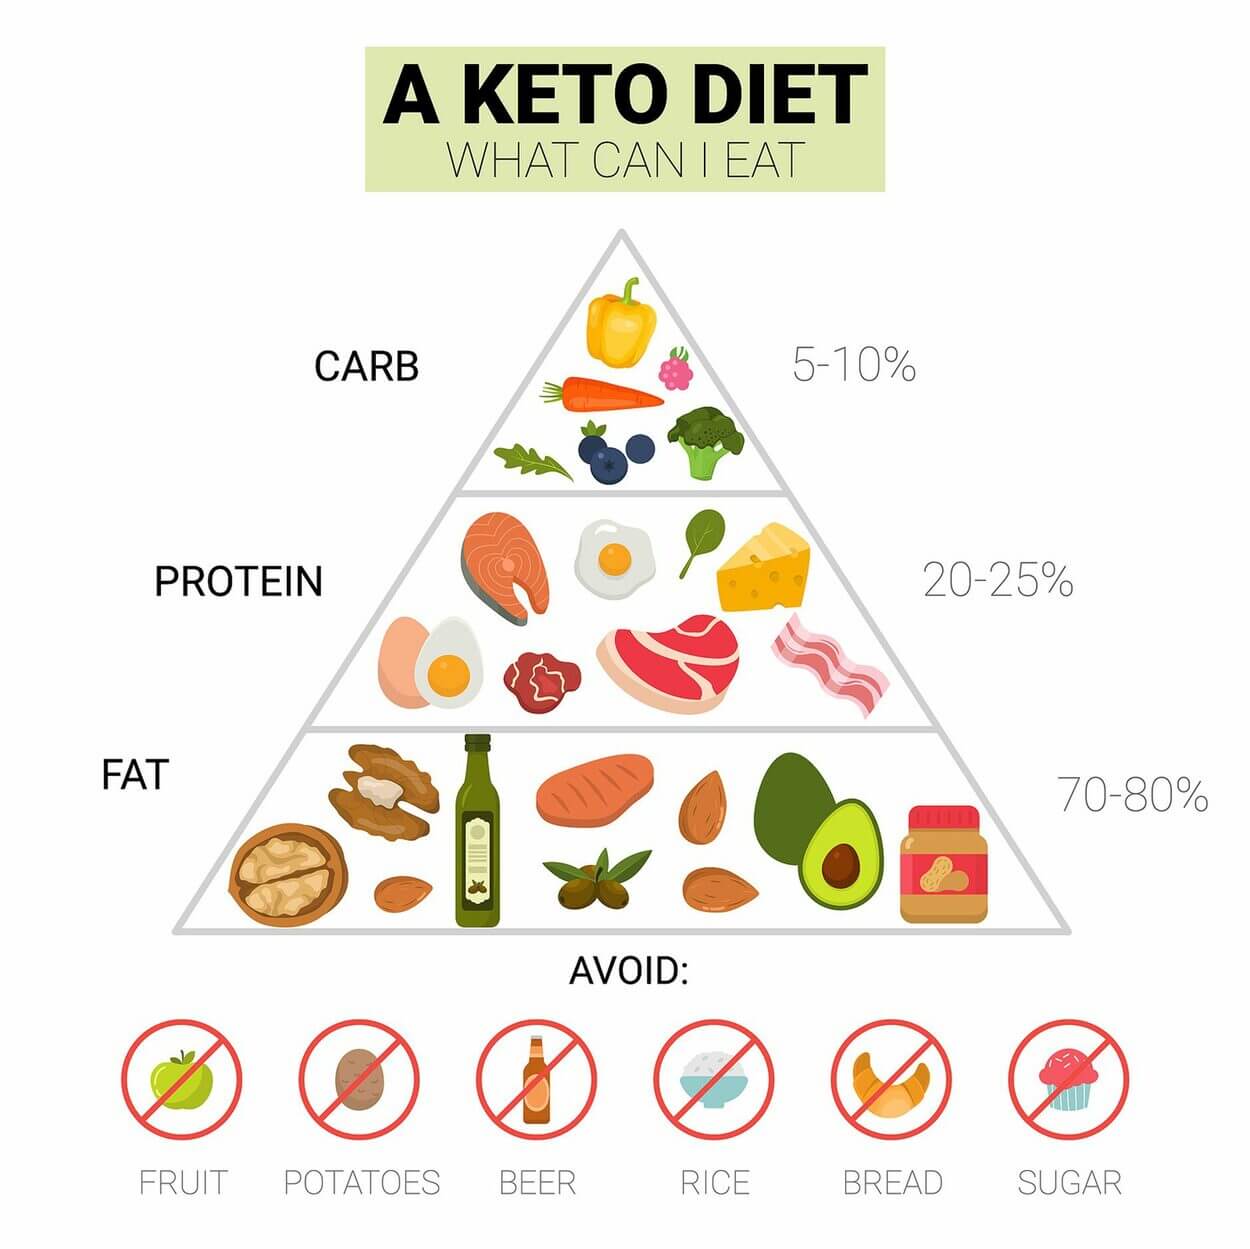 Image depicting Keto friendly diet in a pyramid.